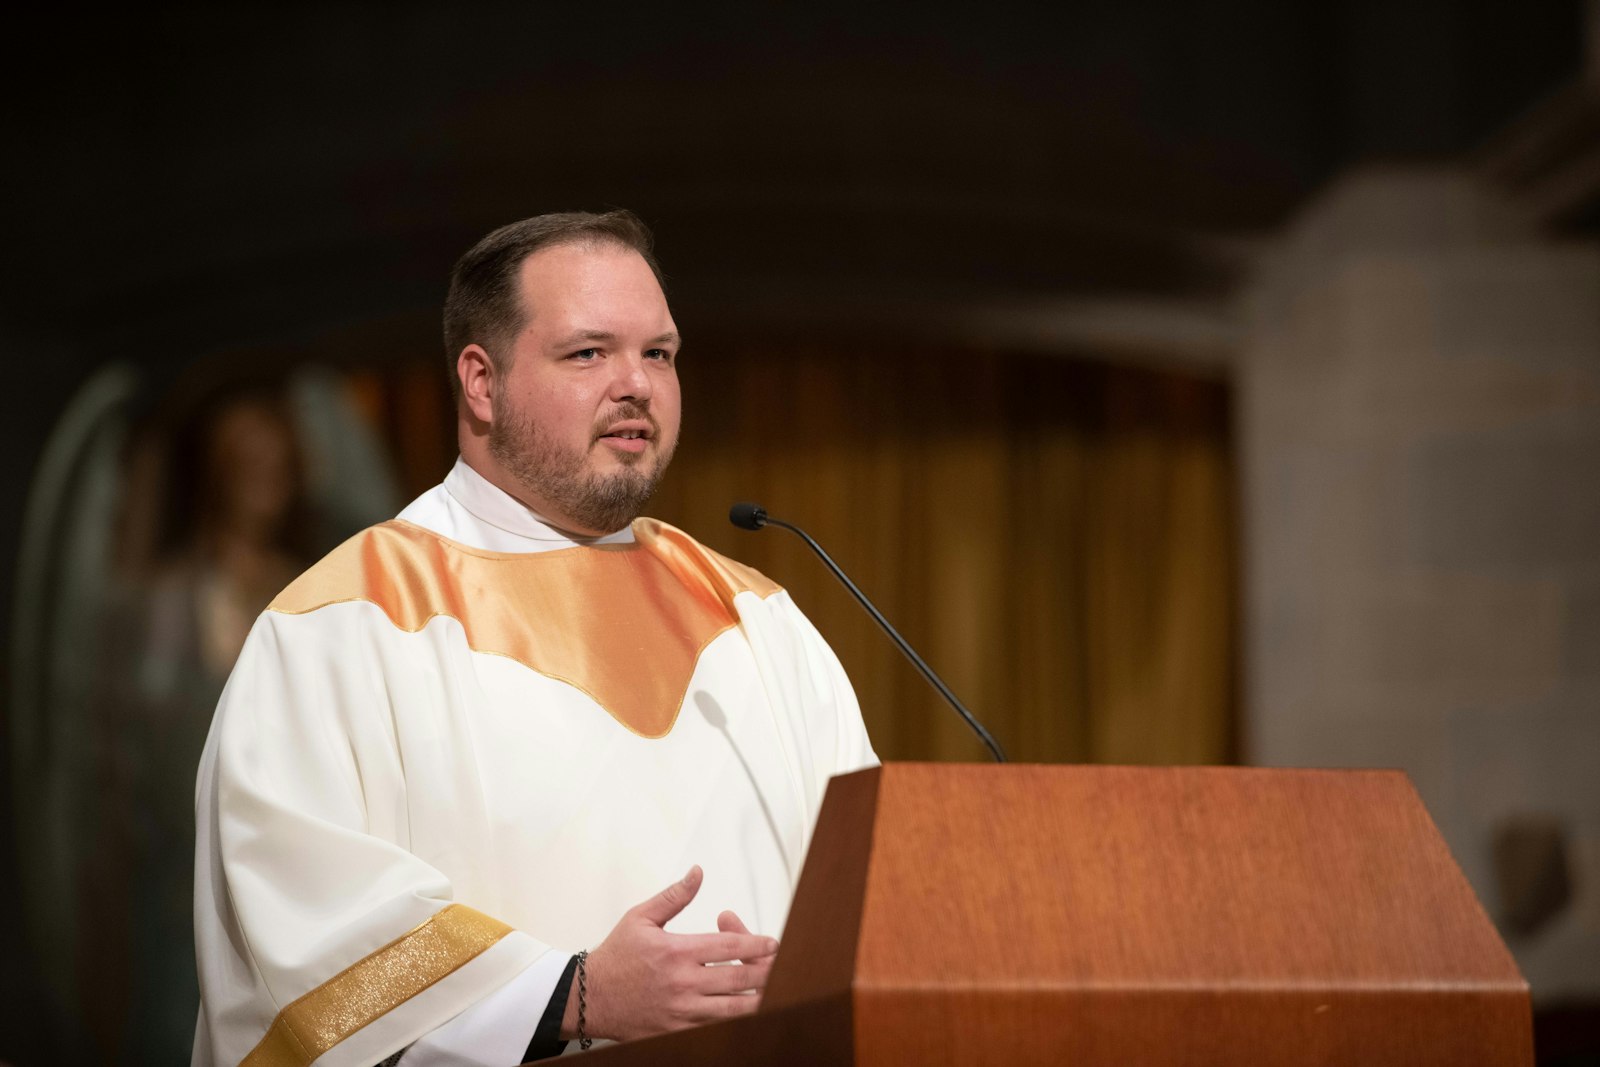 Deacon Andrew Smith delivers a thank-you address after his ordination to the transitional diaconate on behalf of his classmates. Deacon Smith said two visits to World Youth Day, as well as hours spent in Eucharistic adoration, confirmed his vocation.